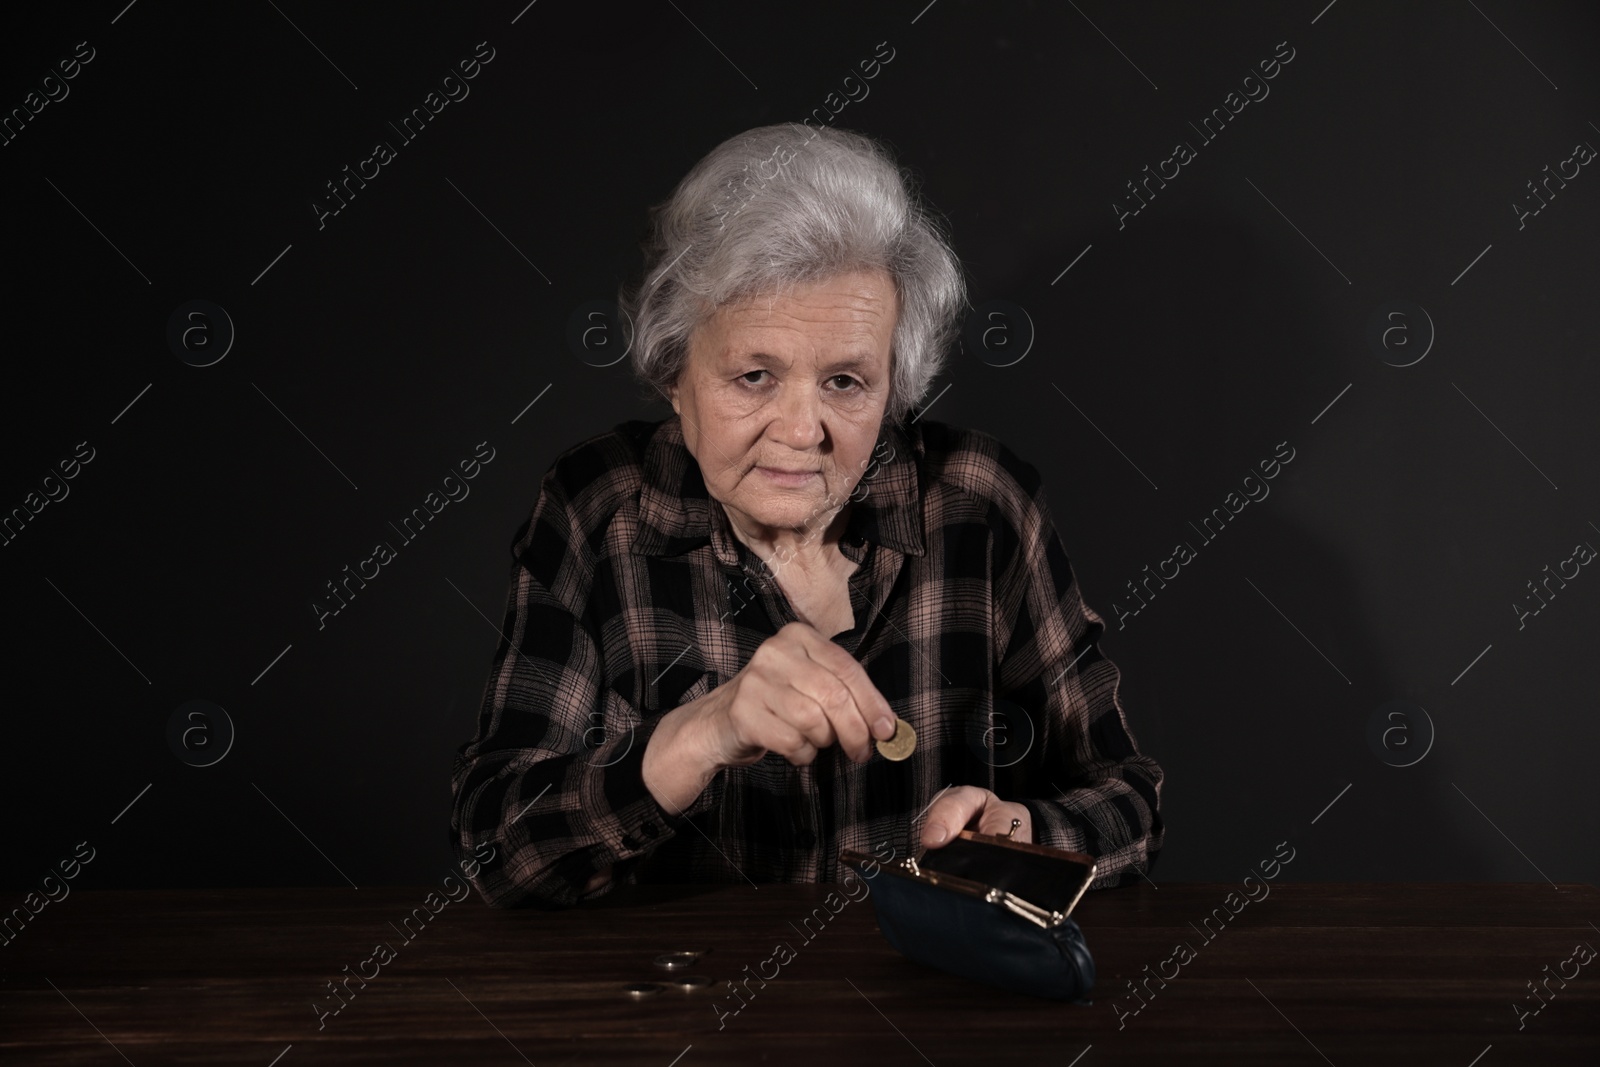 Photo of Poor mature woman putting coins into wallet at table